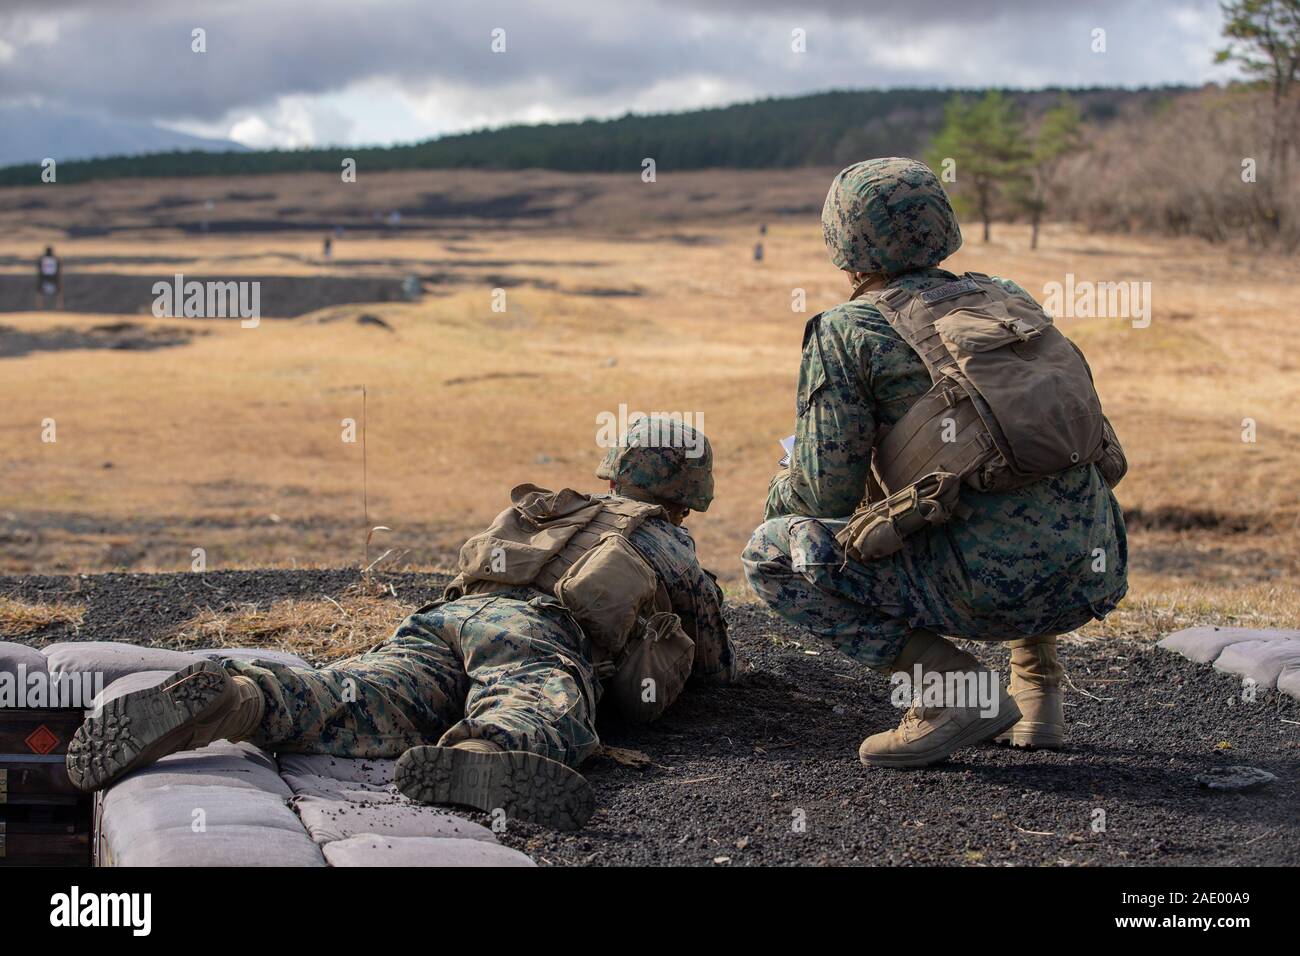 U.S. Marines conduct marksmanship drills during exercise Fuji Viper 20-2 on Camp Fuji, Japan, Dec. 3, 2019. Fuji Viper is a regularly scheduled training evolution that allows infantry units to maintain their lethality and proficiency in infantry and combined arms tactics. This iteration of the exercise is executed by an activated reserve unit, 1st Battalion, 25th Marine Regiment, currently attached to 4th Marine Regiment, 3rd Marine Division, as part of the unit deployment program. (U.S. Marine Corps photo by Lance Cpl. Ujian Gosun) Stock Photo